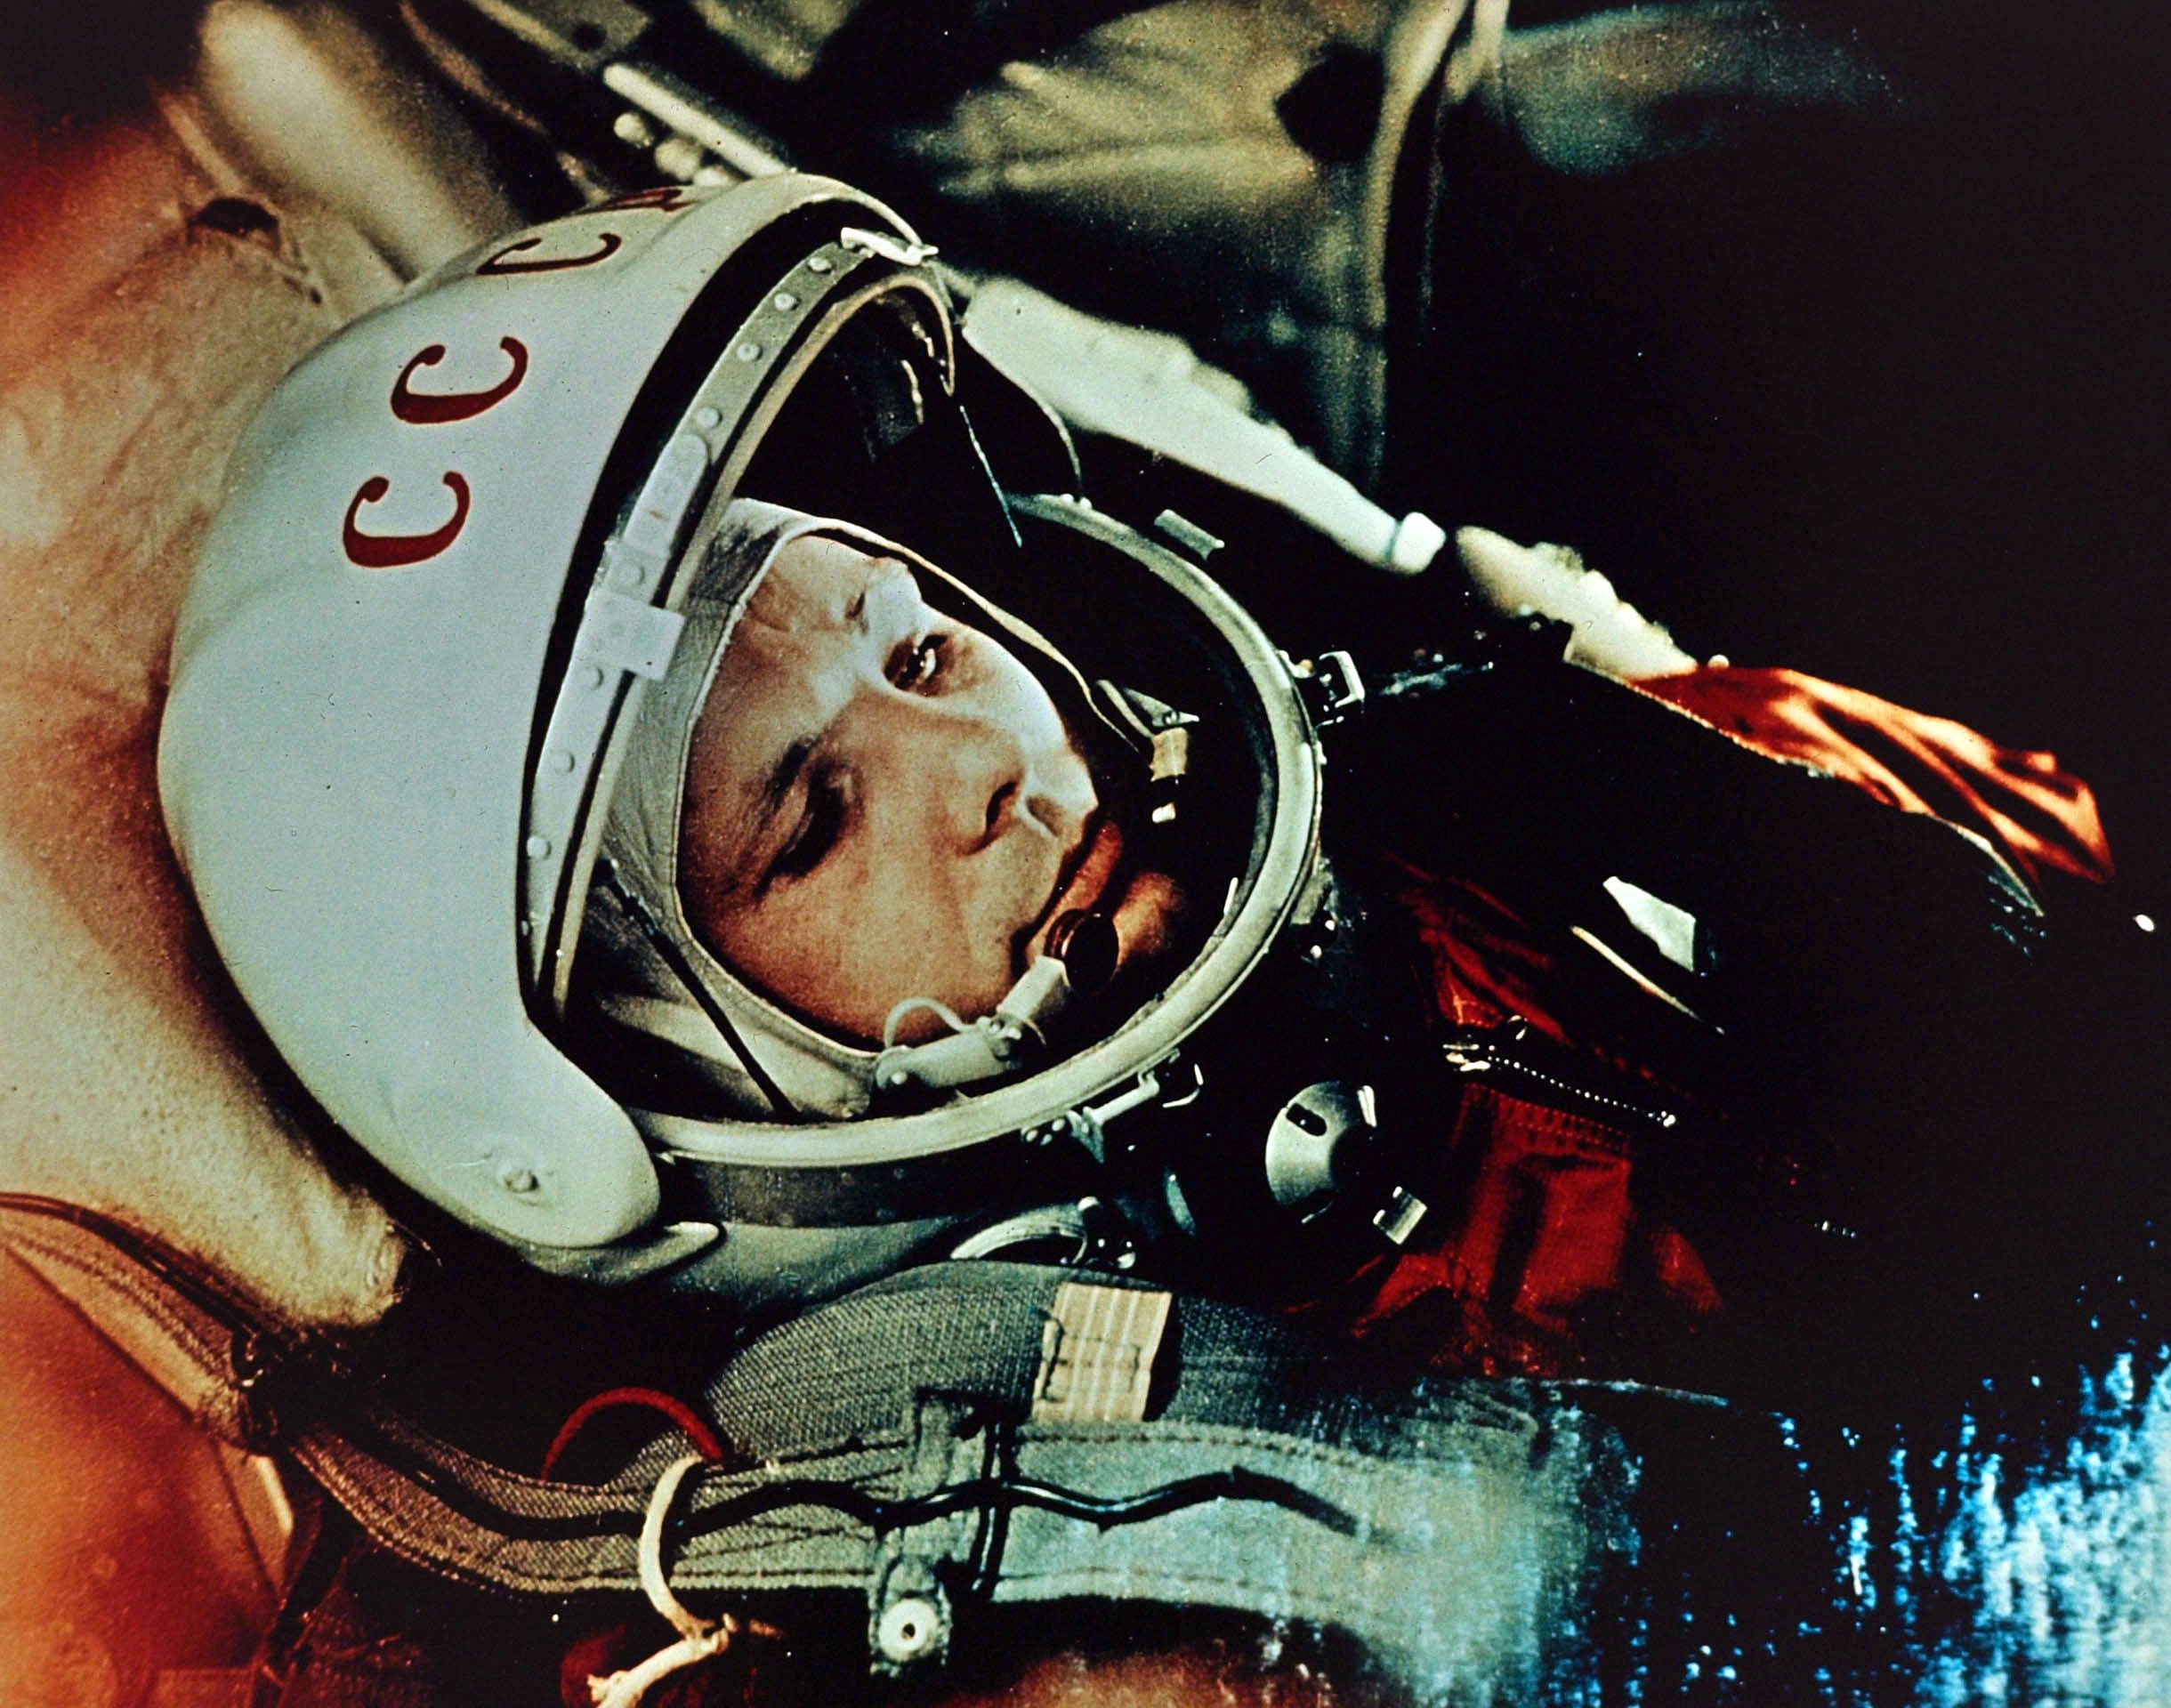 soviet cosmonaut yuri gagarin in space suit ready for first human in space